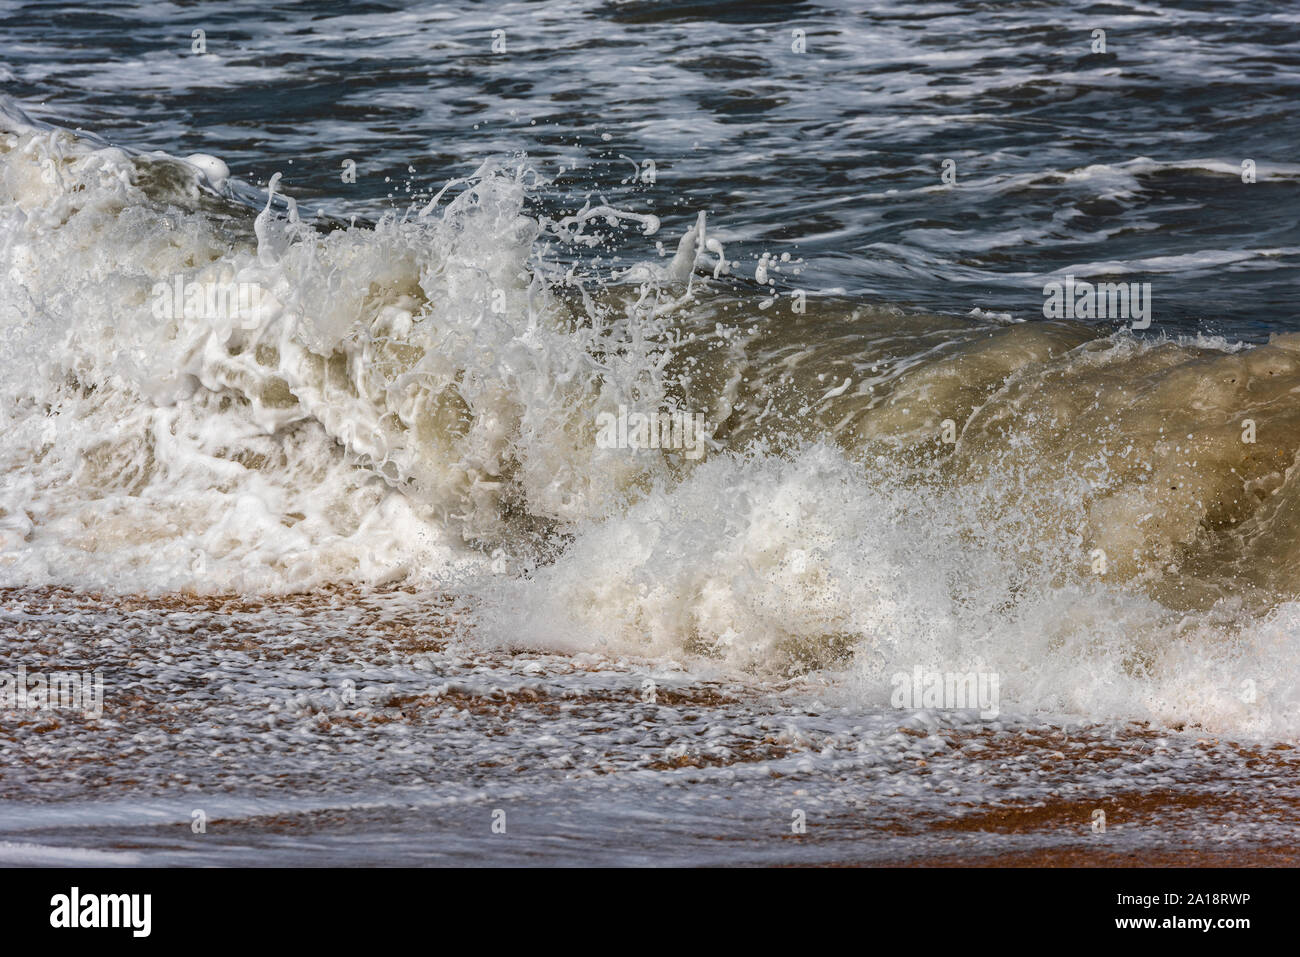 Storm at sea, big foamy waves breaking on shore Stock Photo